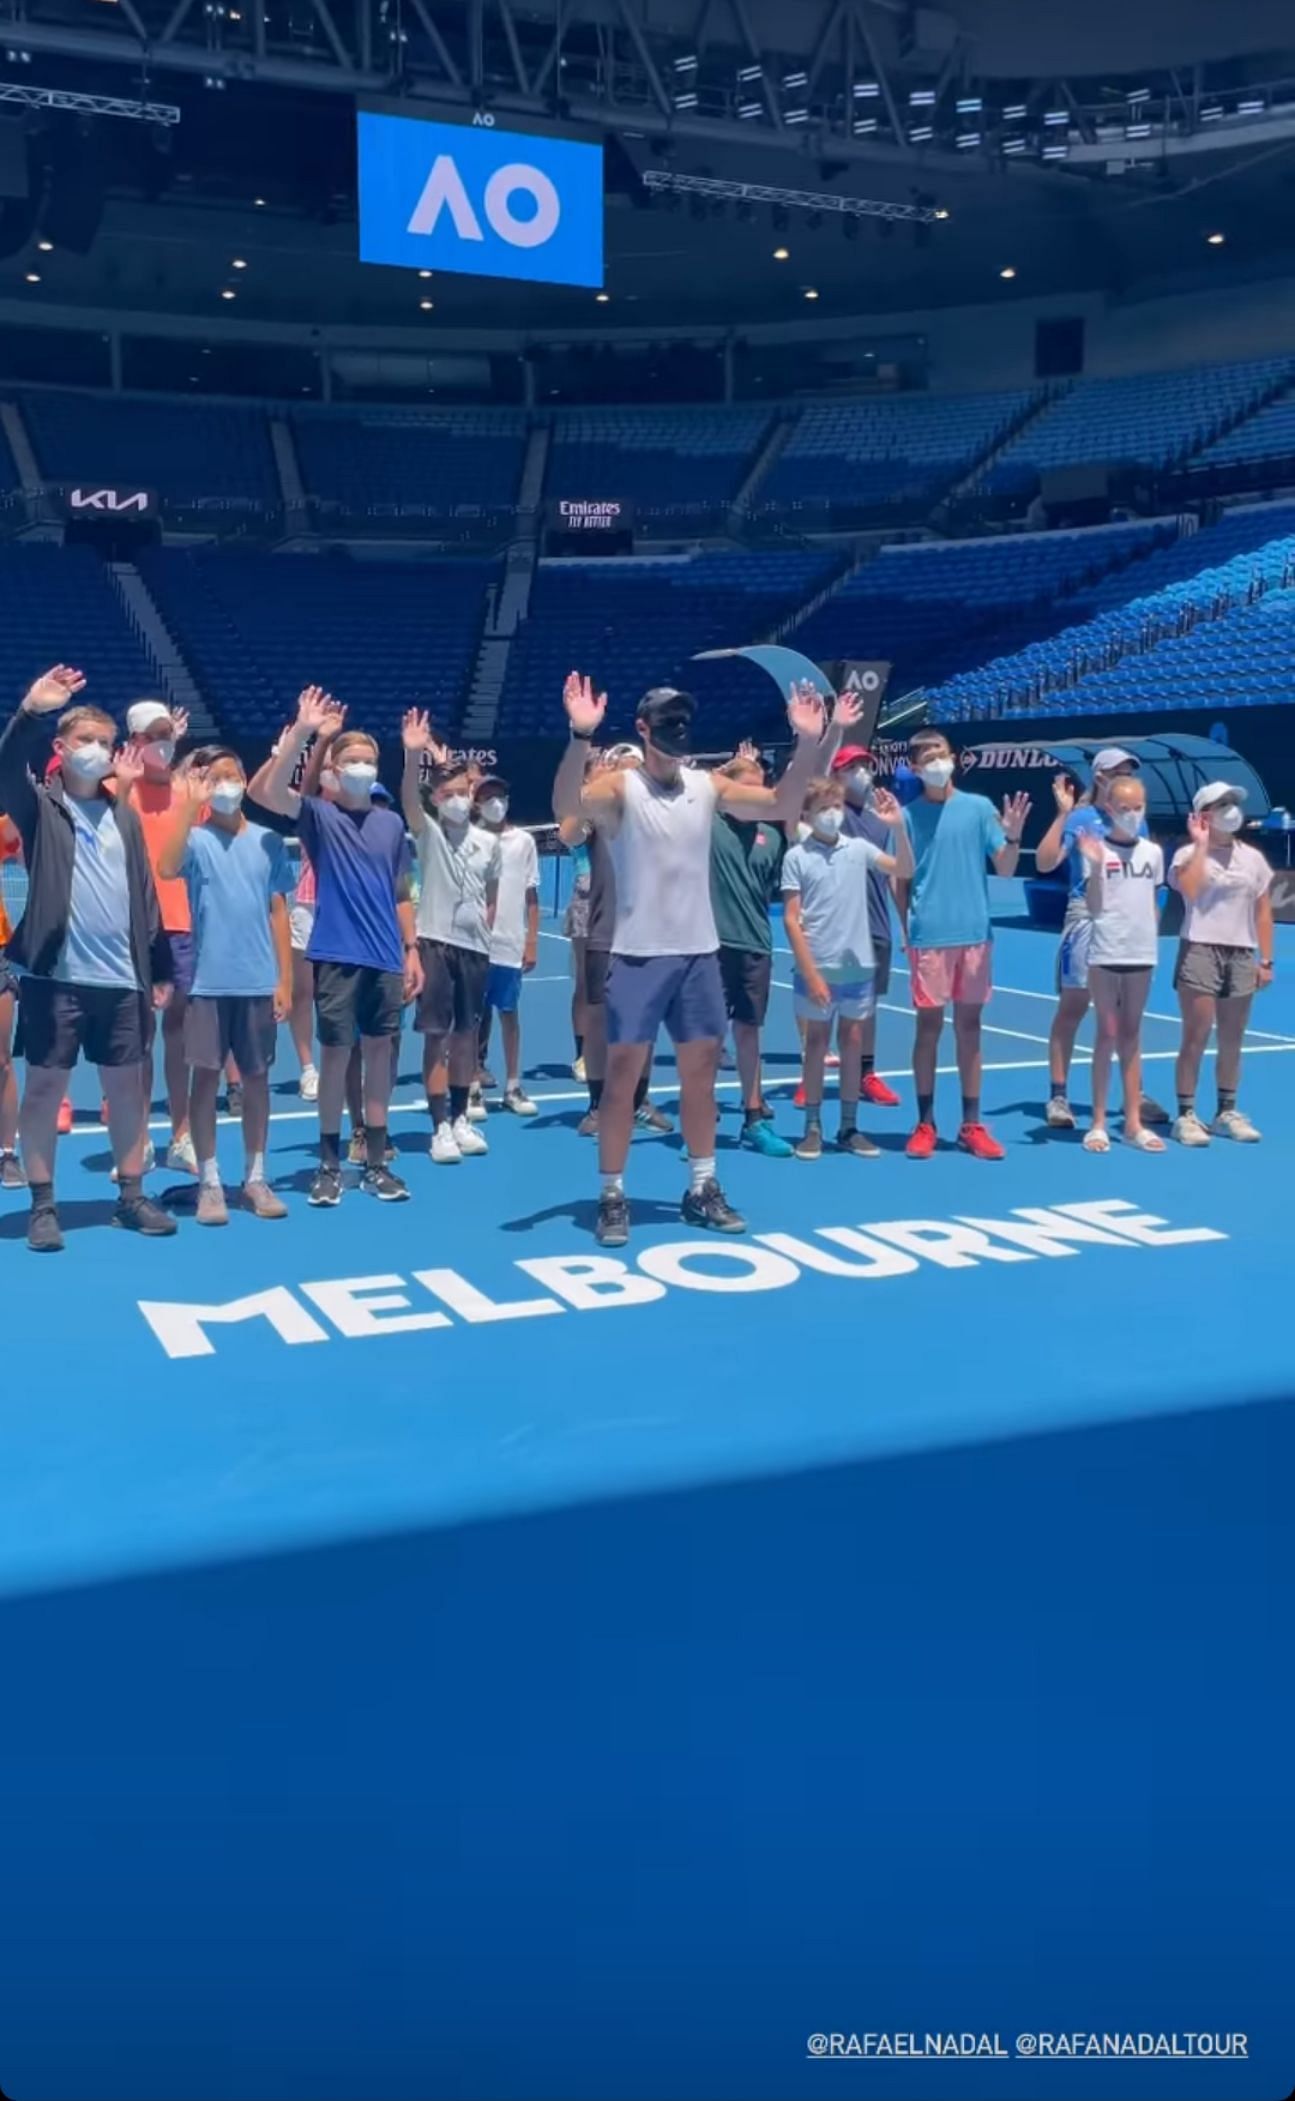 Nadal poses for photos with the kids at the Rod Laver Arena in Melbourne